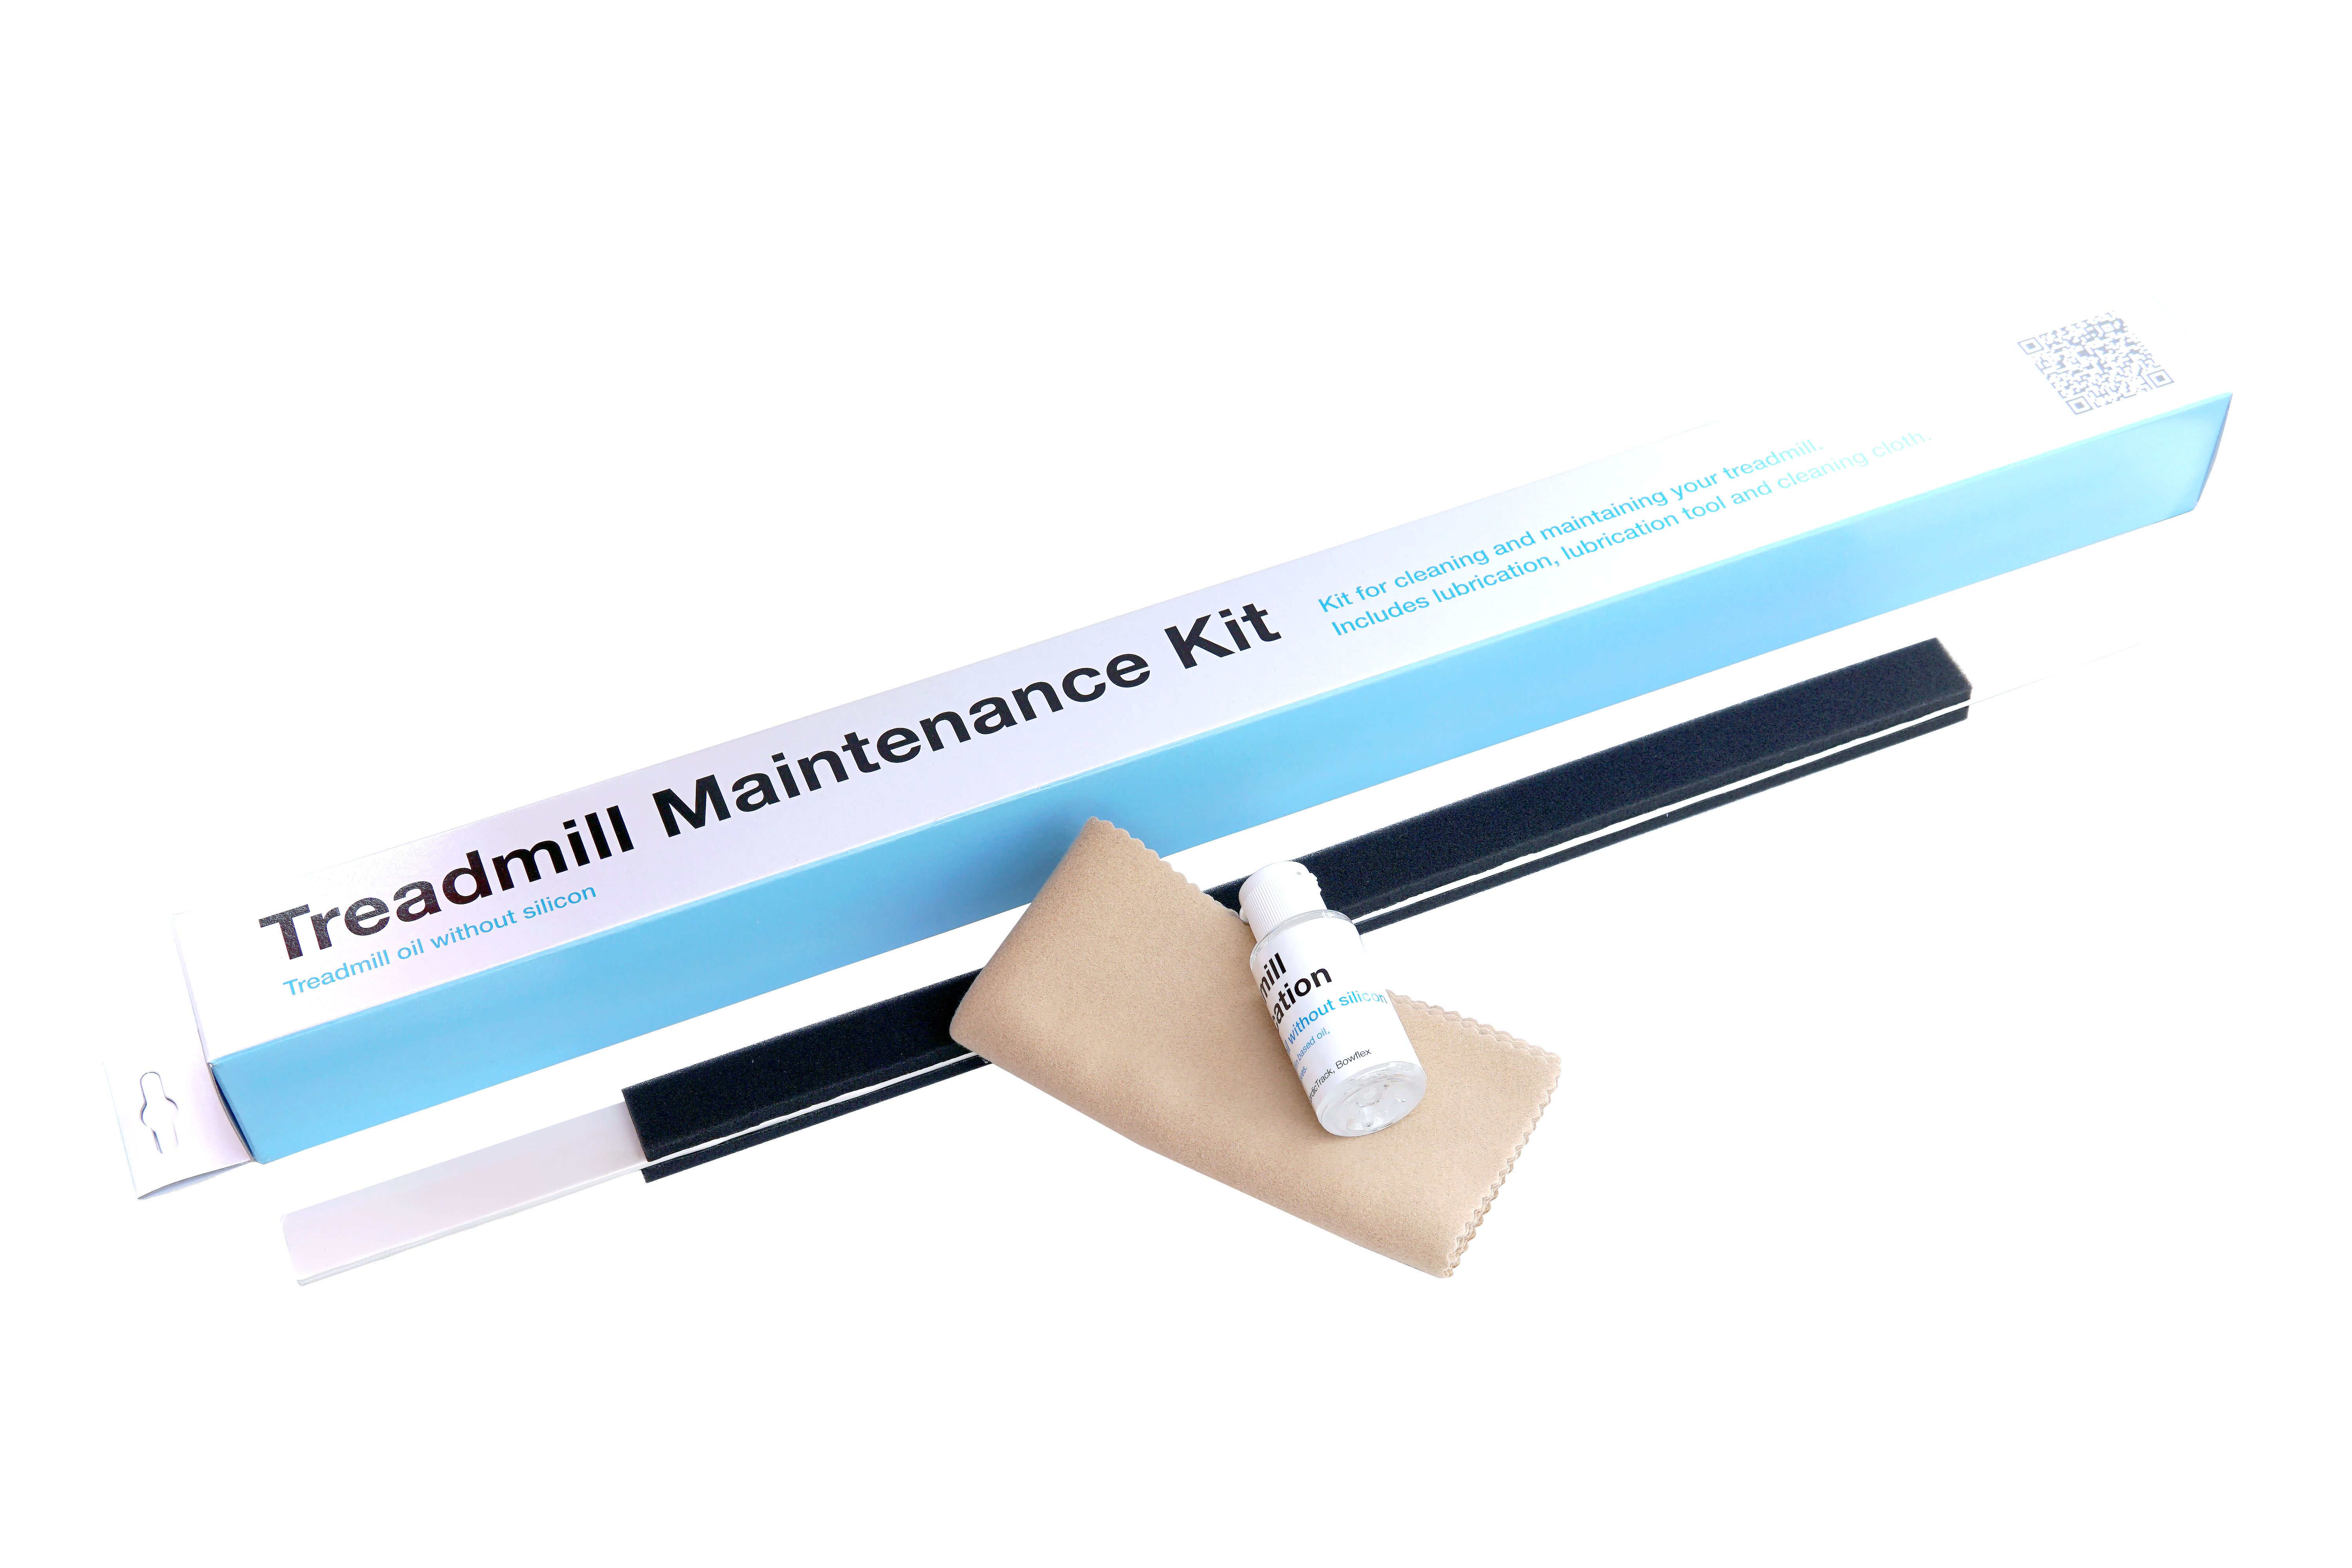 Non brand Treadmill Maintenance kit with oil without Silicon